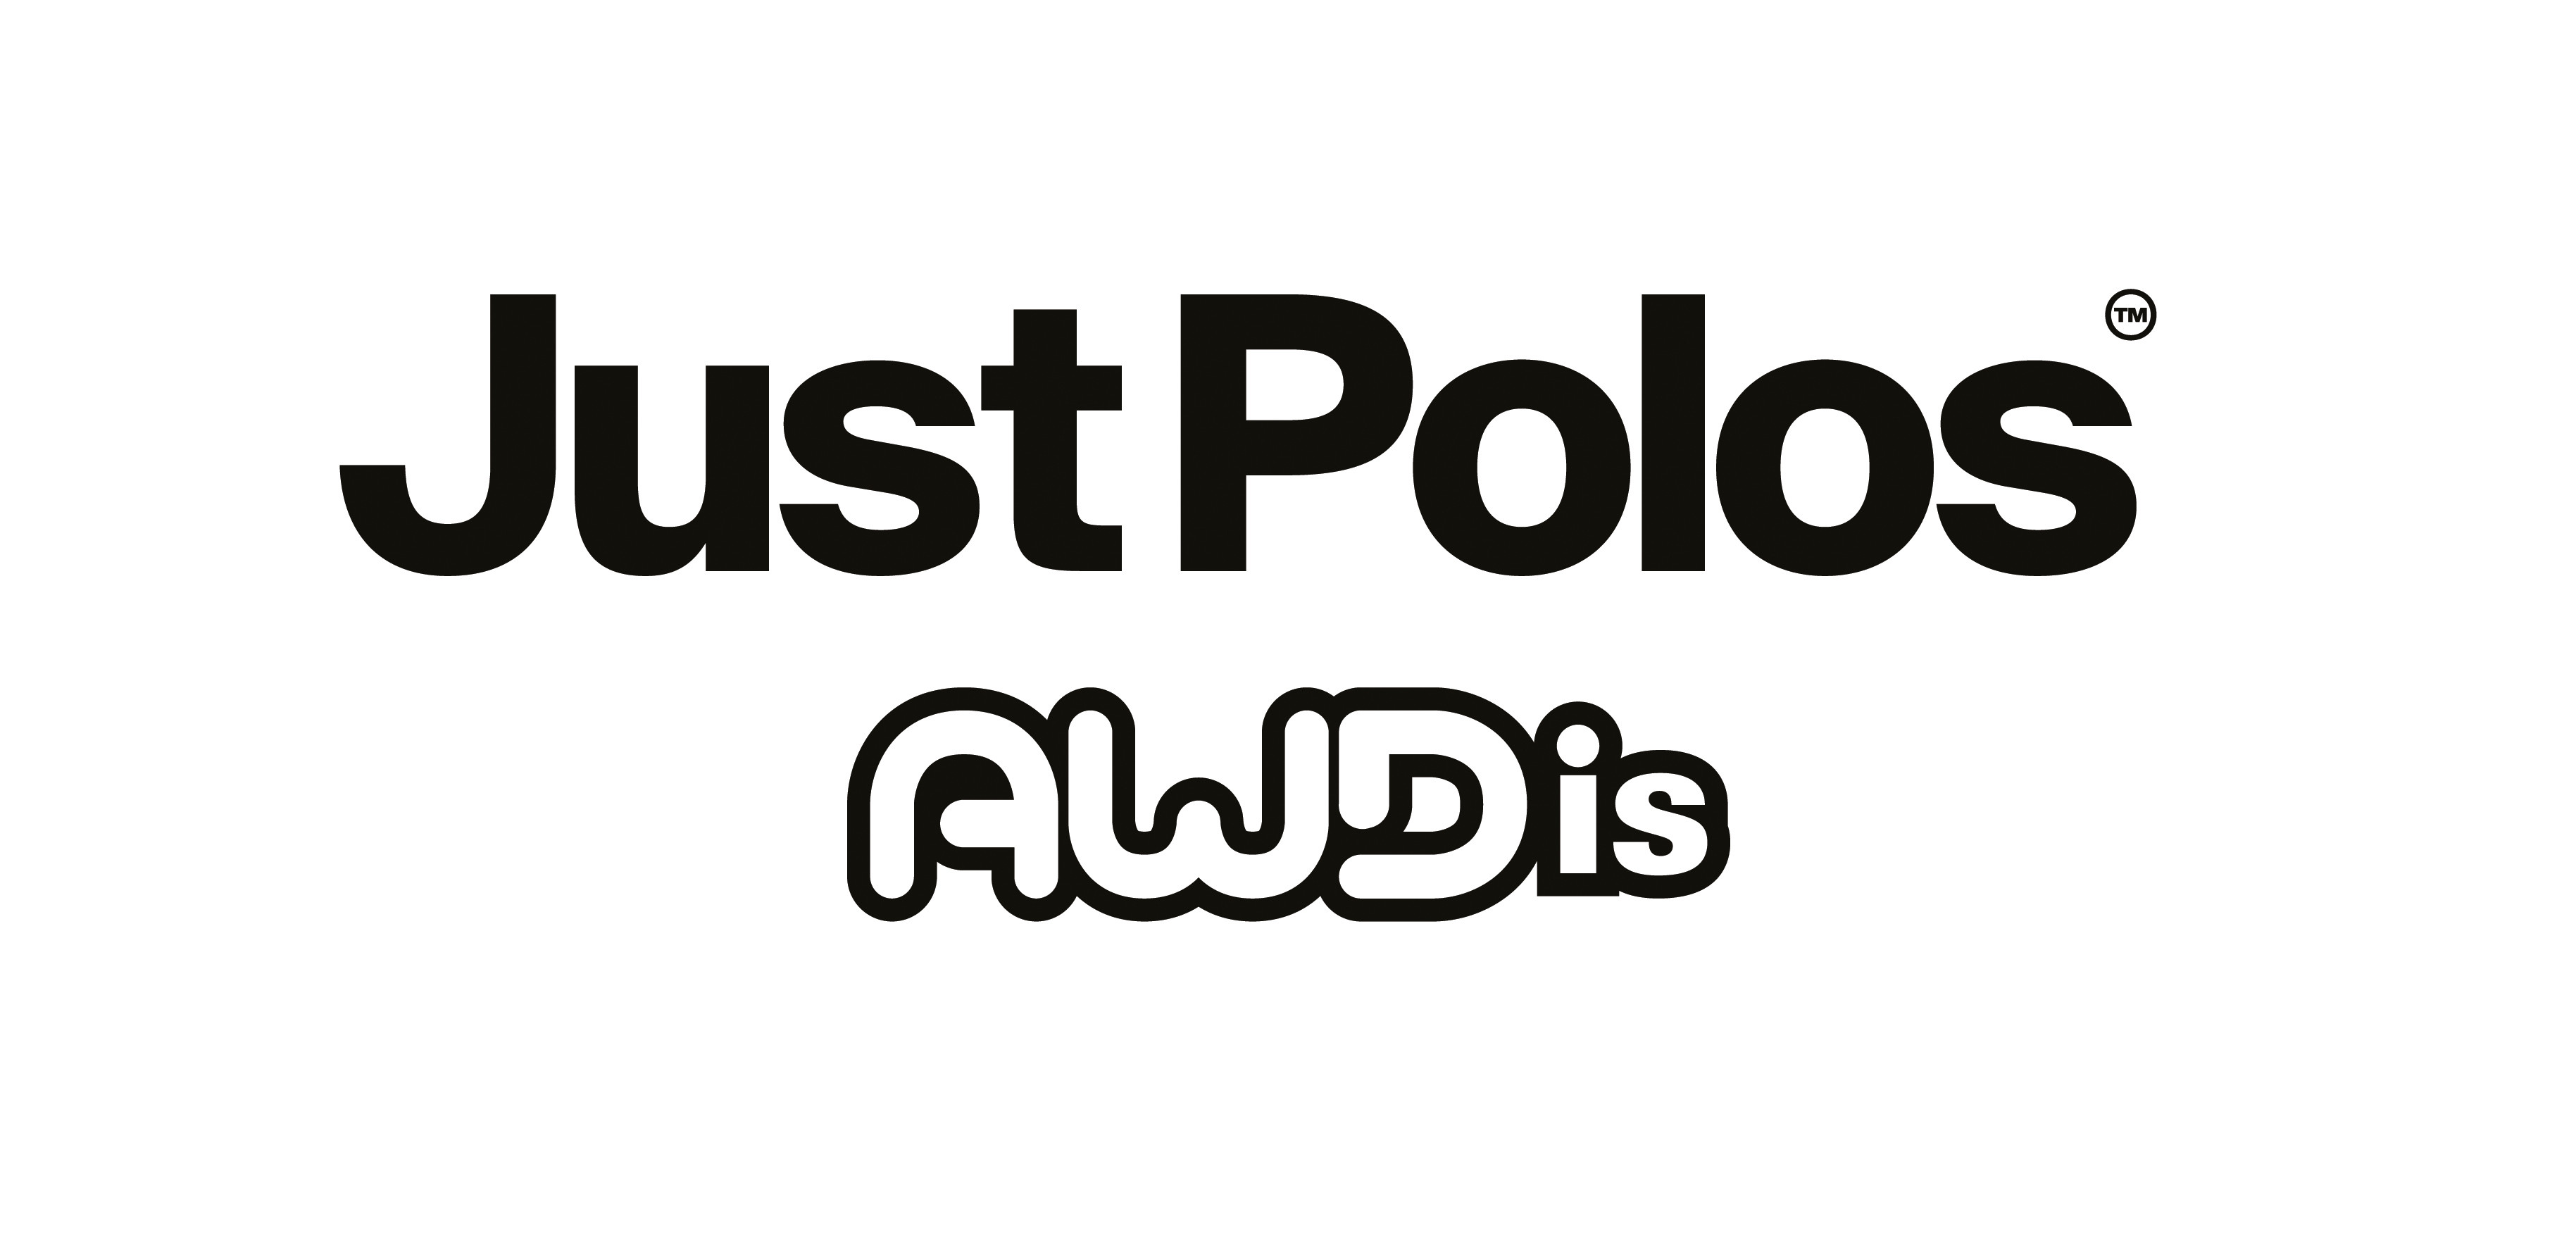 Just Polos